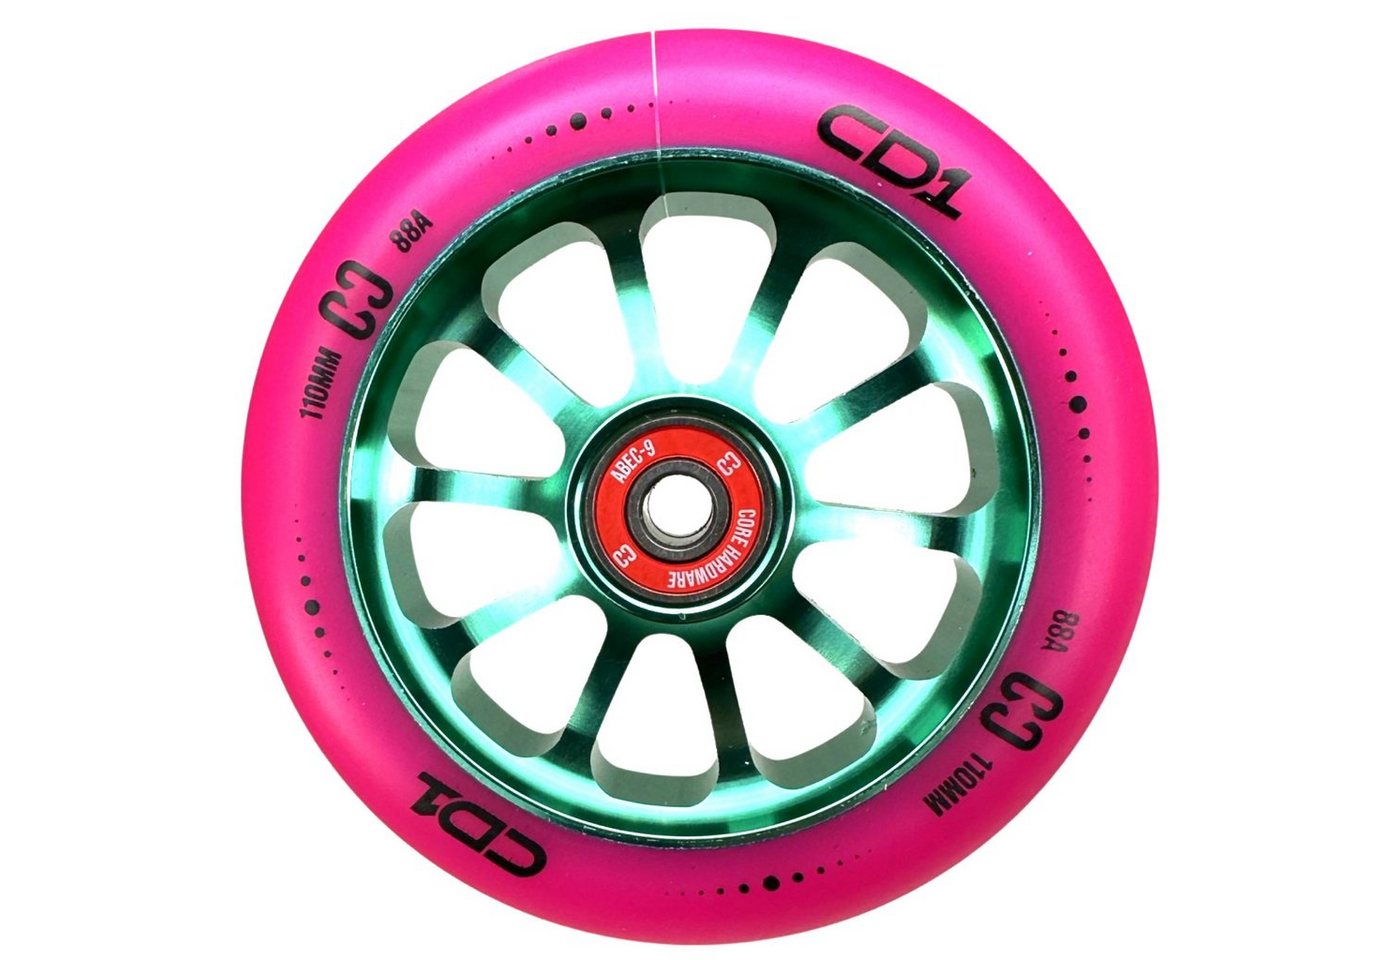 Core Action Sports Stuntscooter Core CD1 Stunt-Scooter Rolle 110mm Petrol/Pu Pink von Core Action Sports